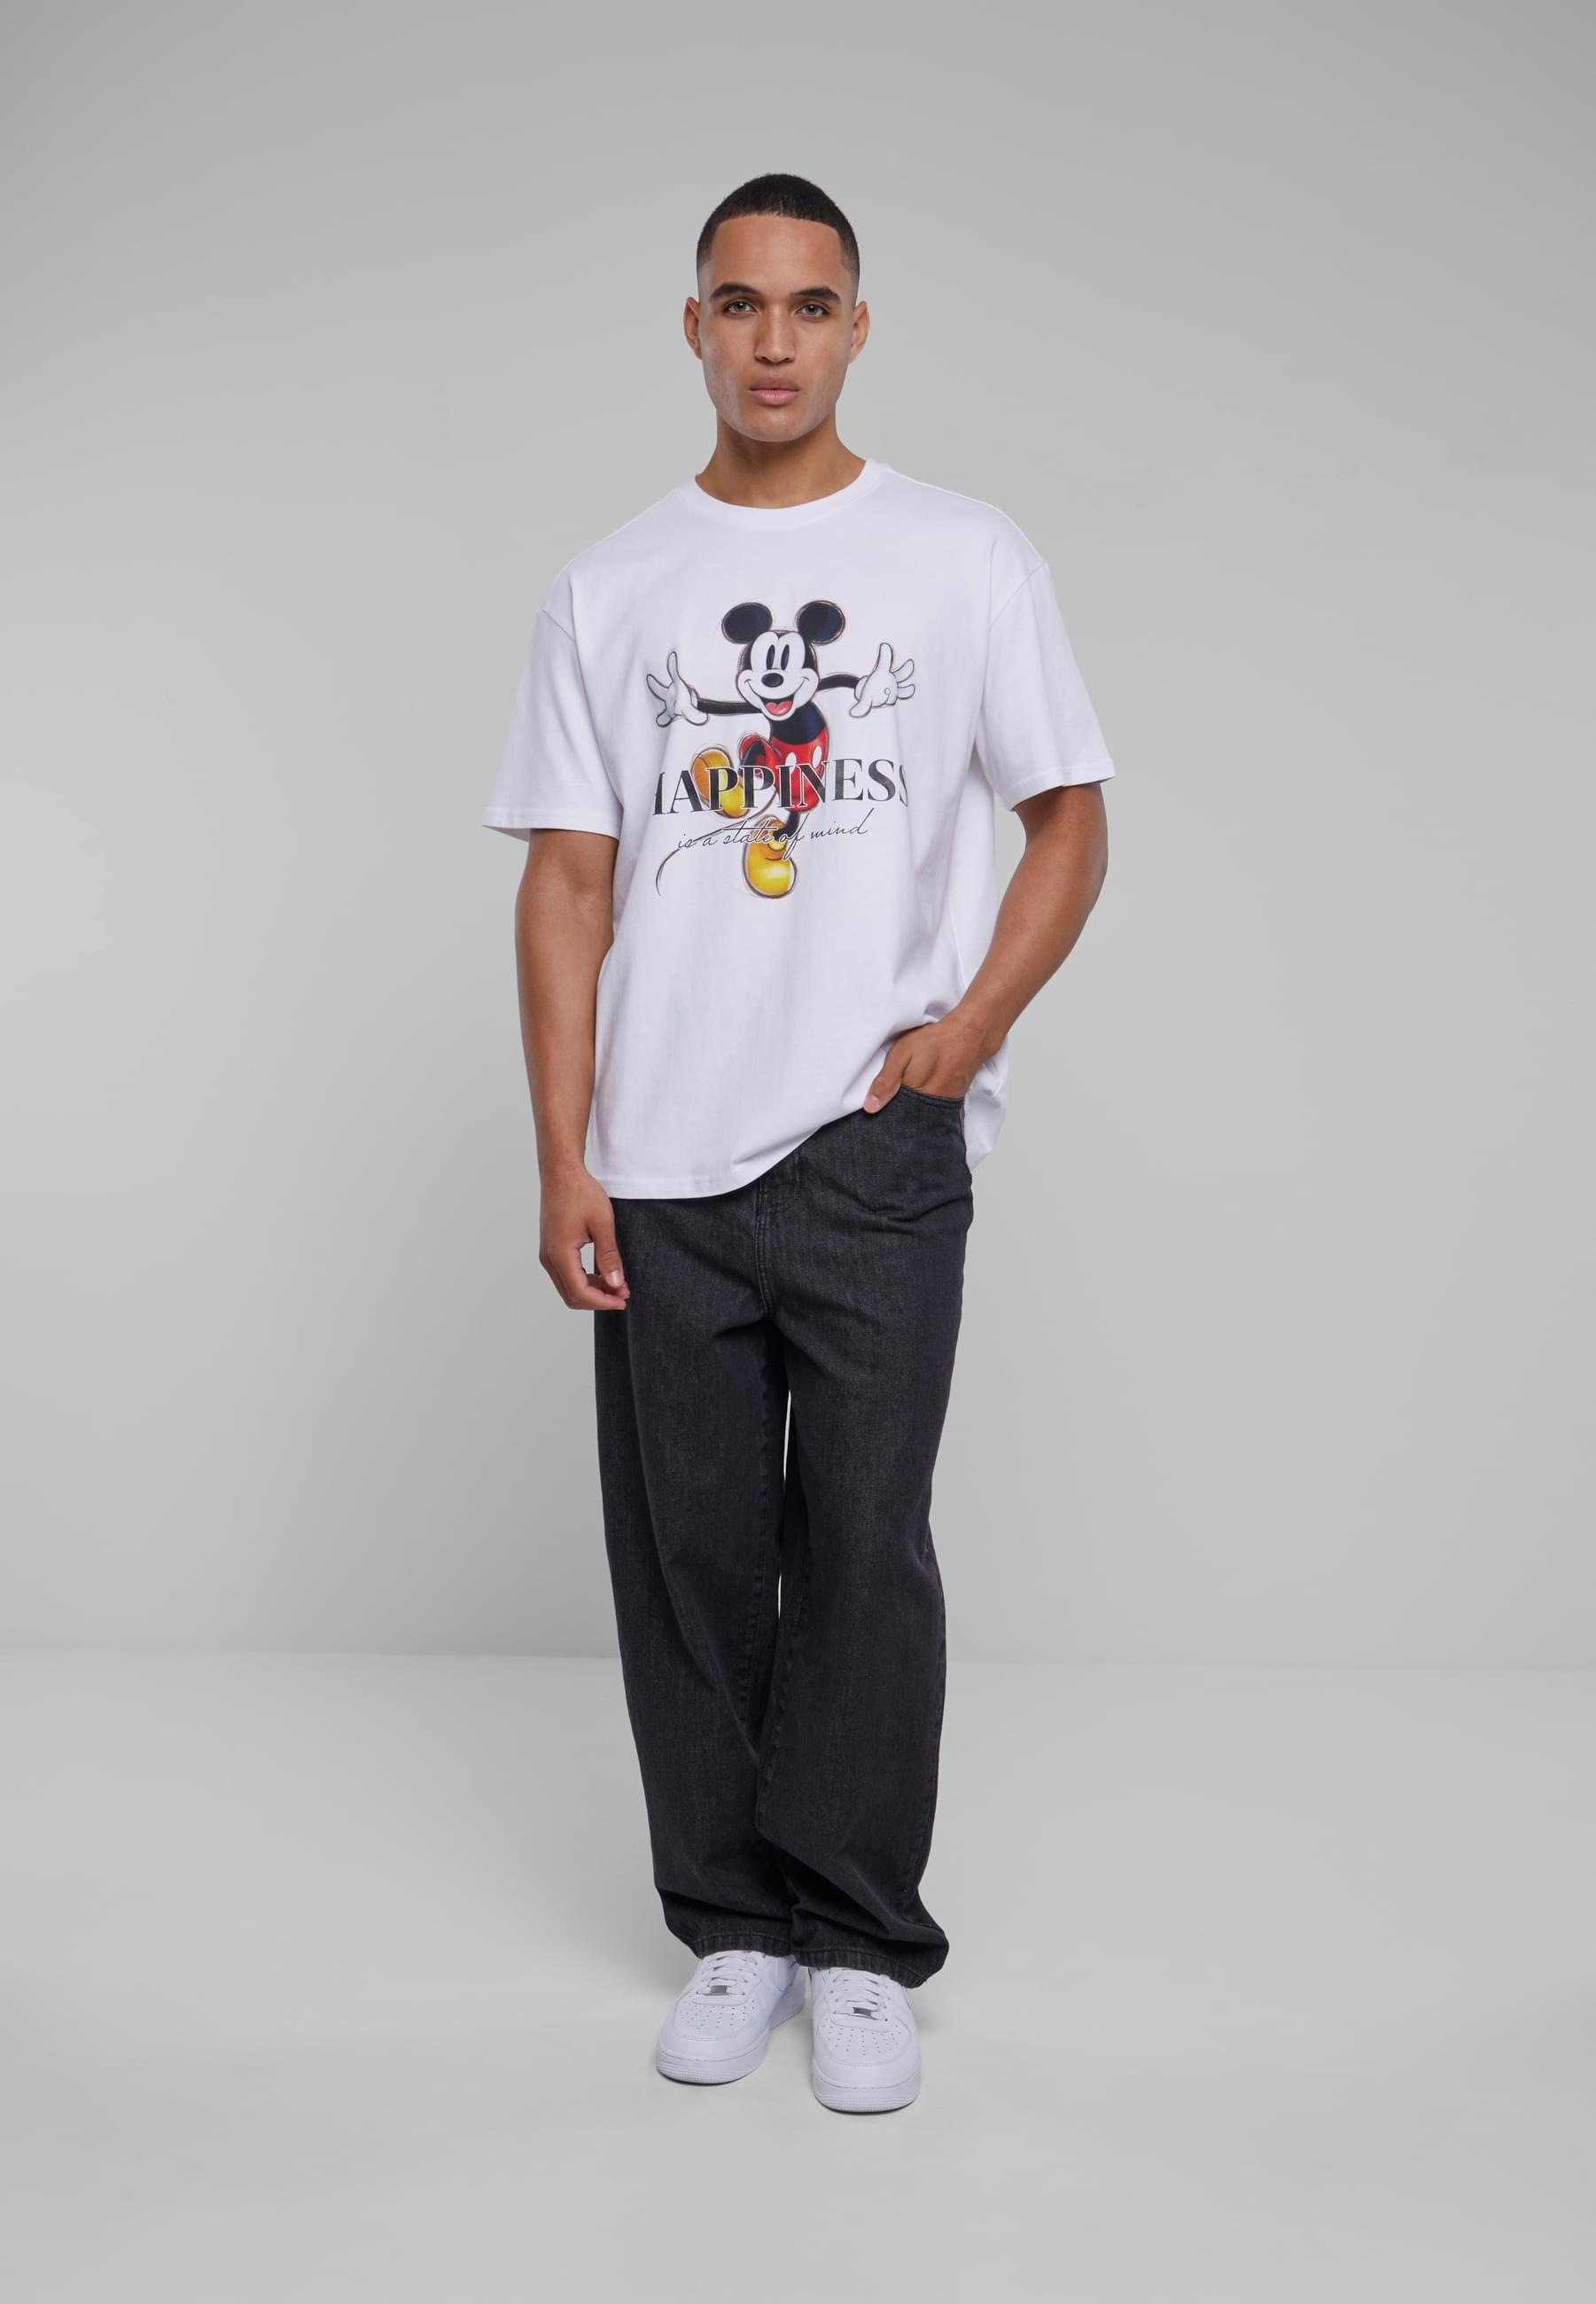 kaufen »Unisex Tee«, | (1 Mickey BAUR tlg.) by online 100 T-Shirt Disney Mister Upscale Tee Oversize Happiness